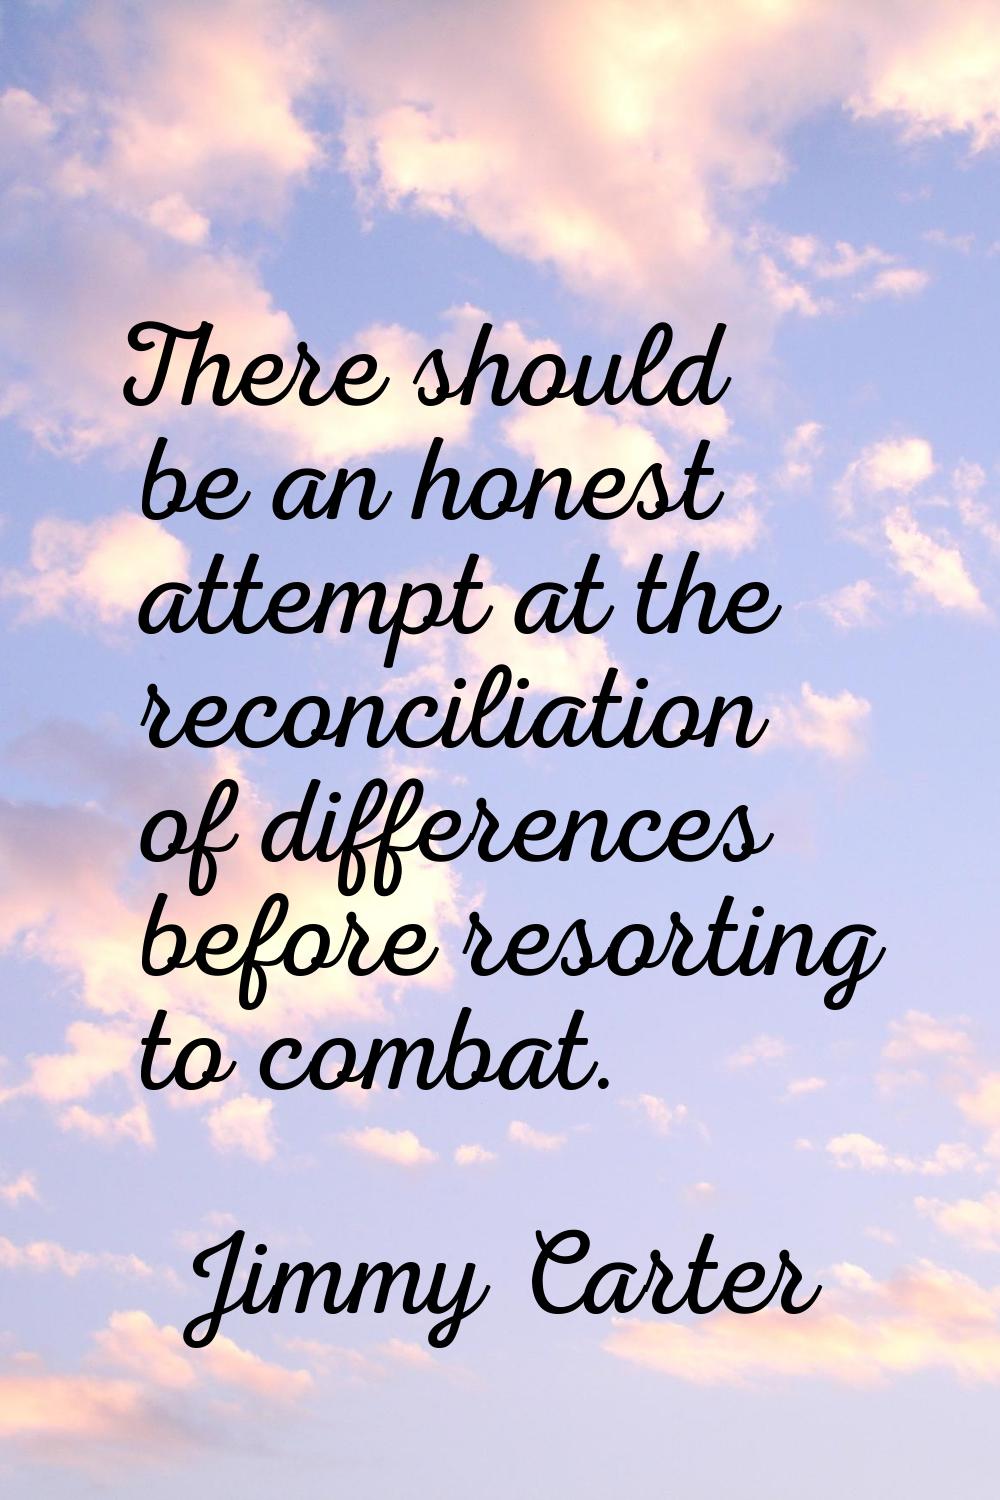 There should be an honest attempt at the reconciliation of differences before resorting to combat.